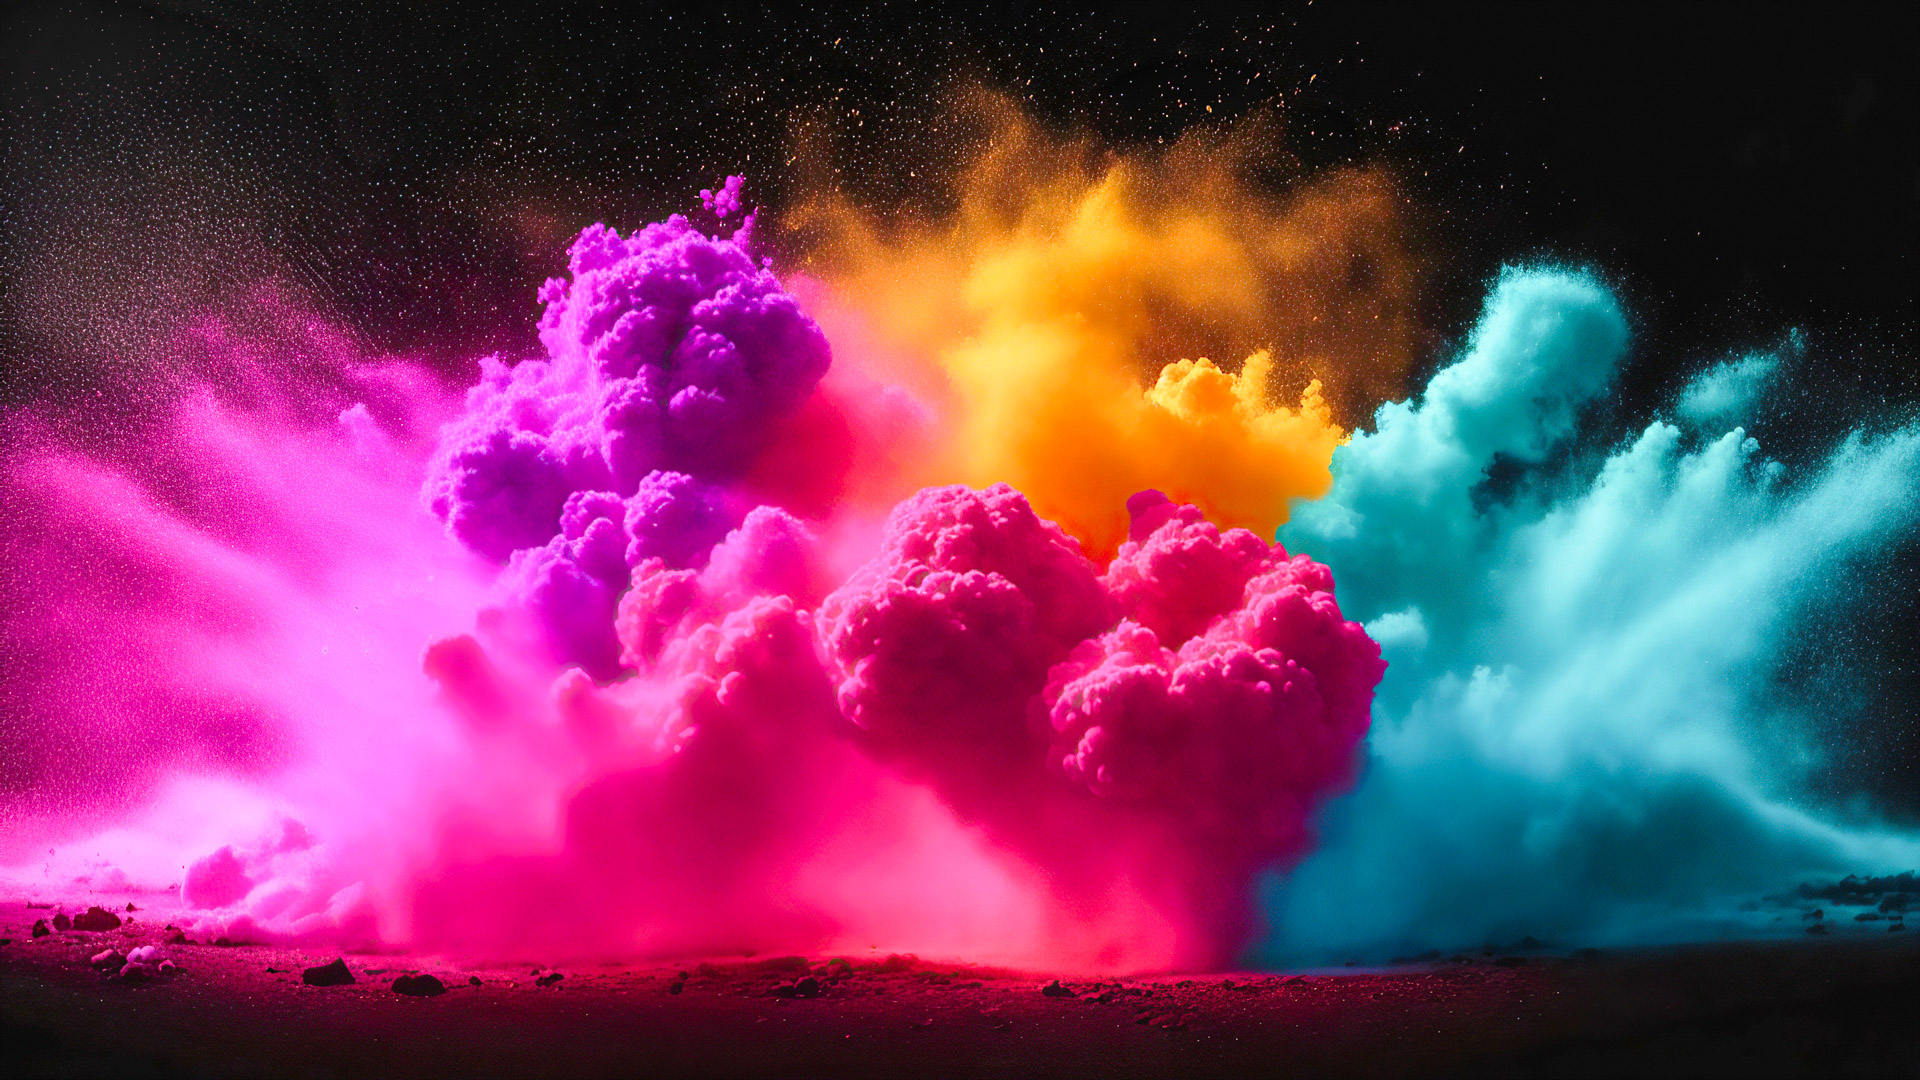 Witness an explosion of colorful dust powder on your desktop with our high-definition abstract wallpaper in HD.